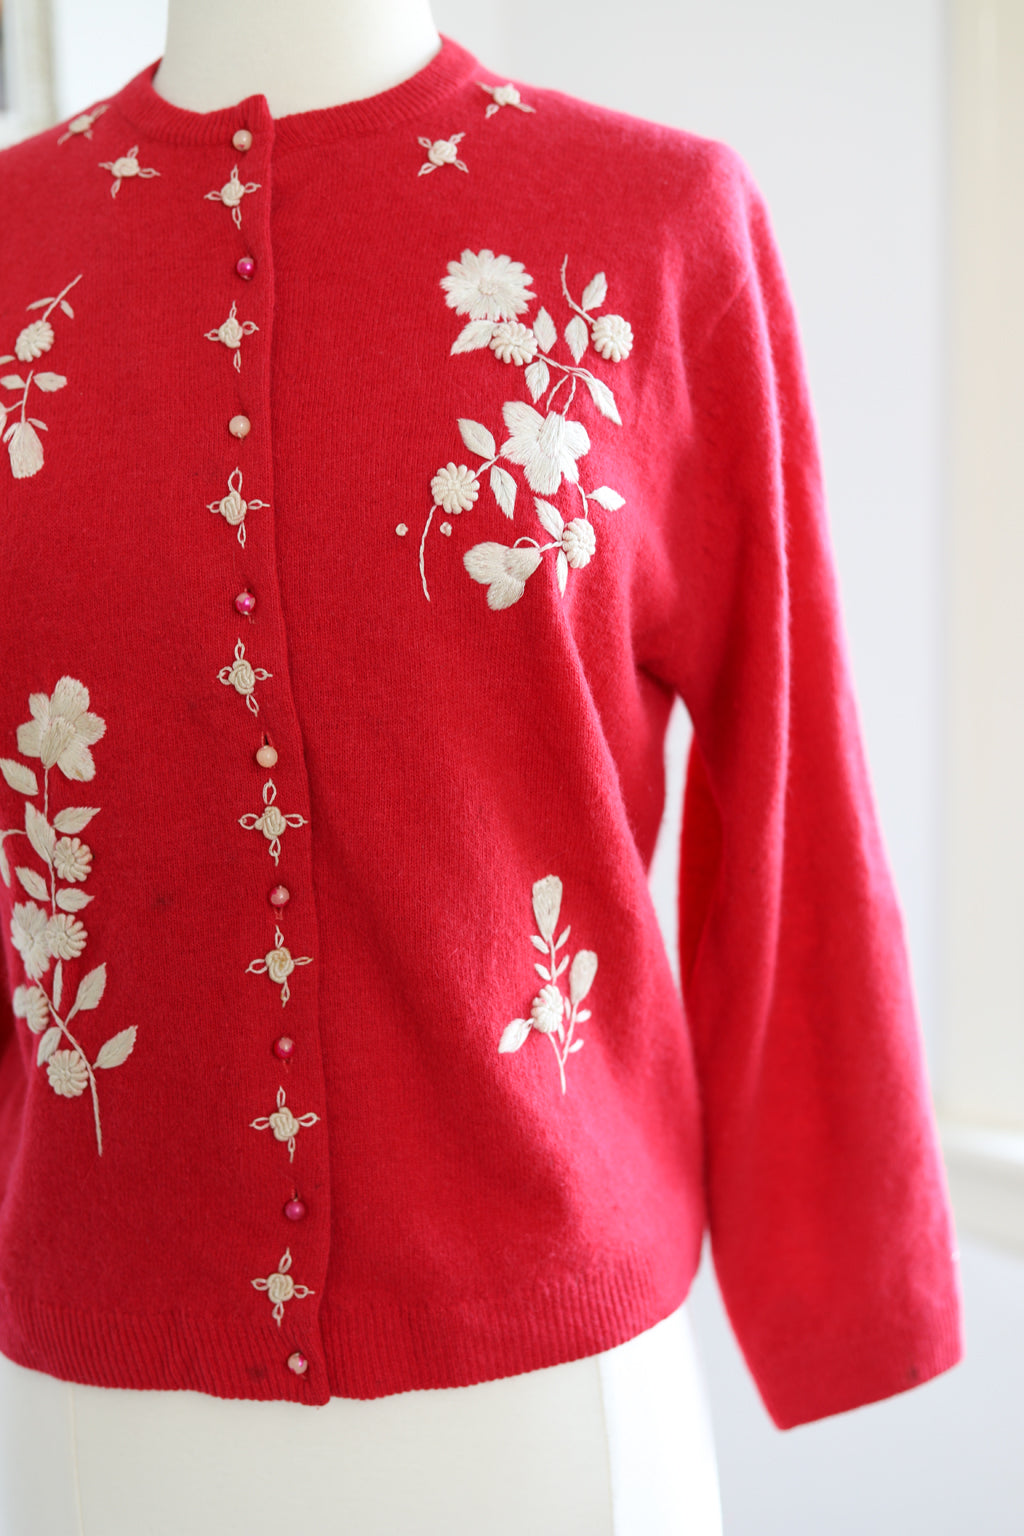 Vintage 1950s to 1960s Hand Embroidered Sweater - Deep Rose Pink Wool Cardigan w Flowers Size L